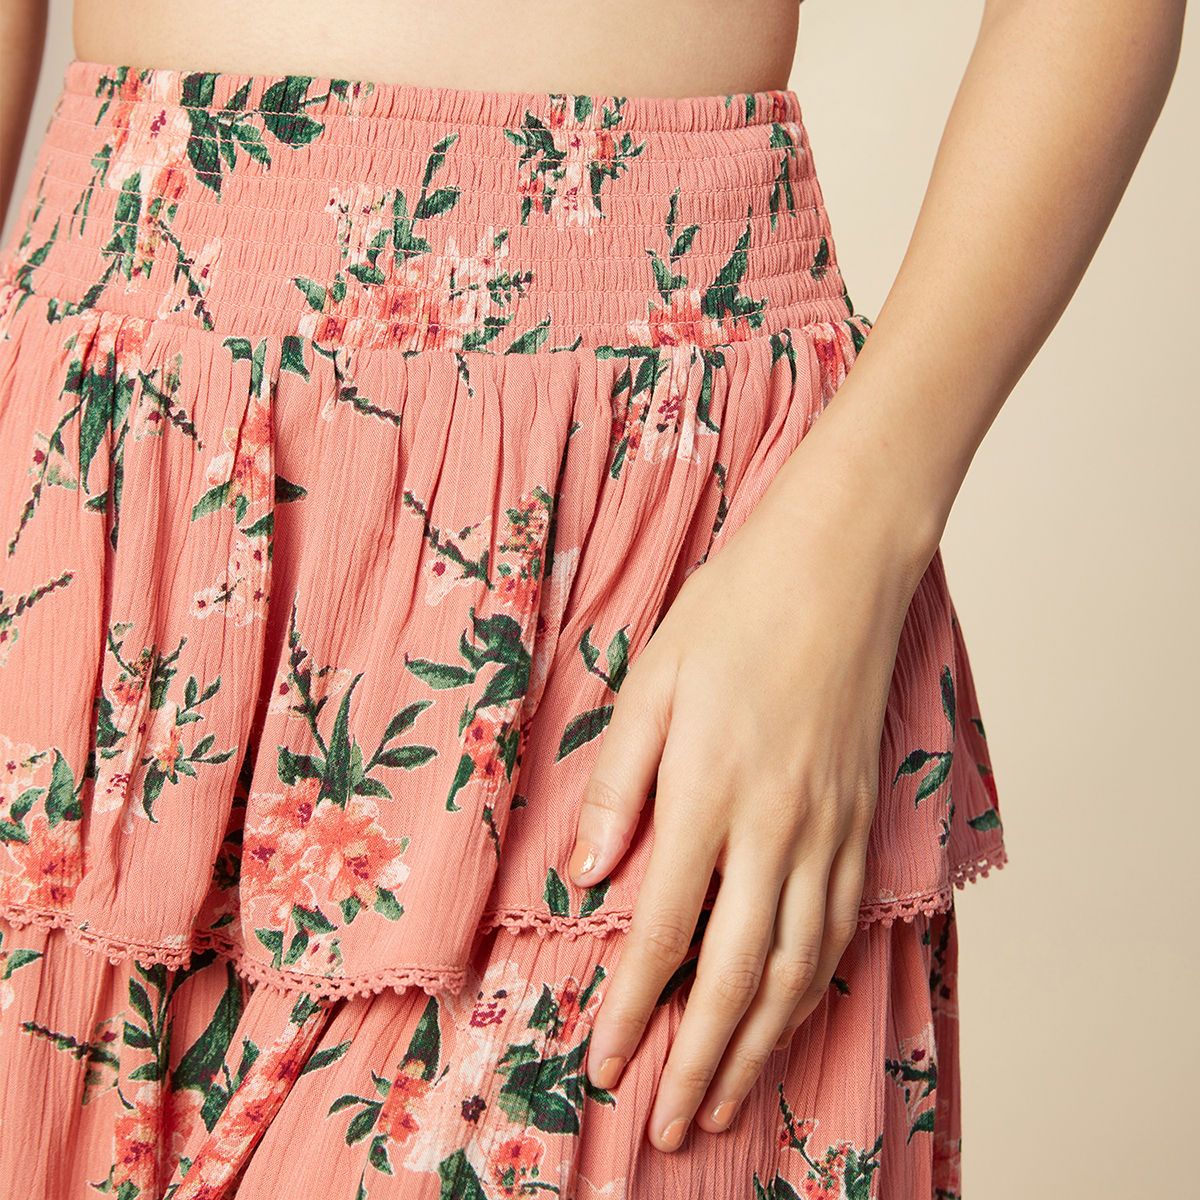 The Best Shoes to Wear with Short Skirts and Dresses - PureWow